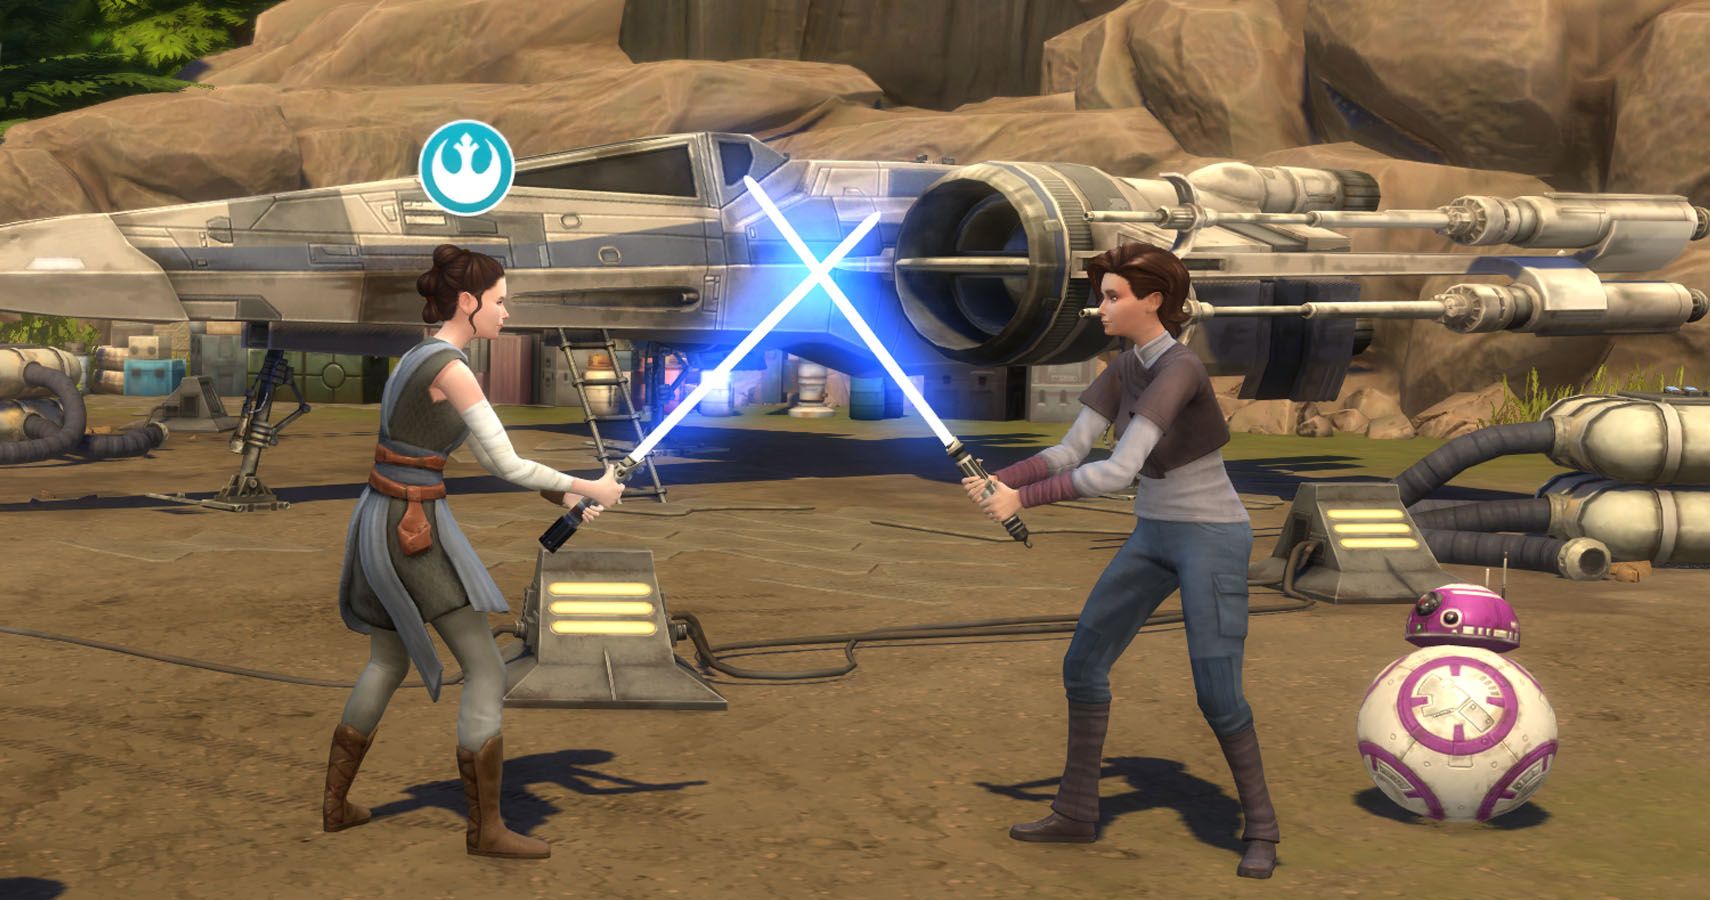 Rey and a female sim crossing lightsabers in from of an x-wing as a BB droid looks on.